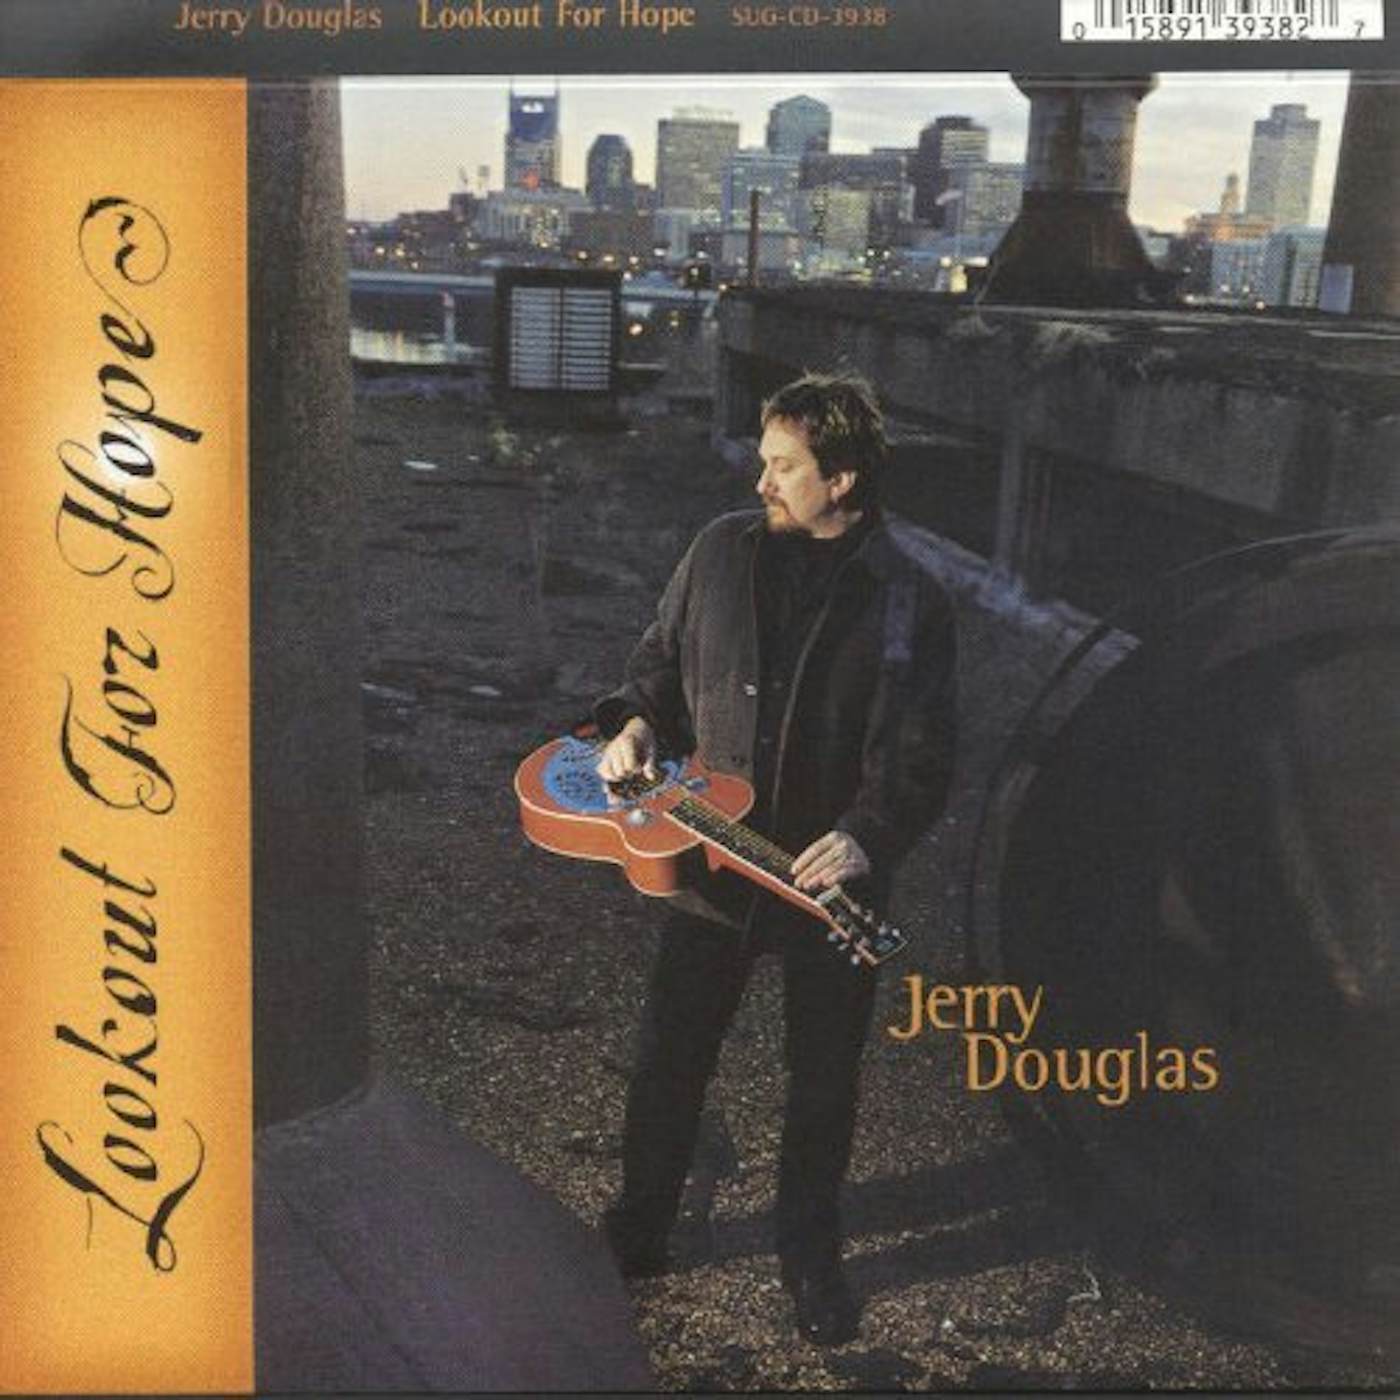 Jerry Douglas LOOKOUT FOR HOPE CD